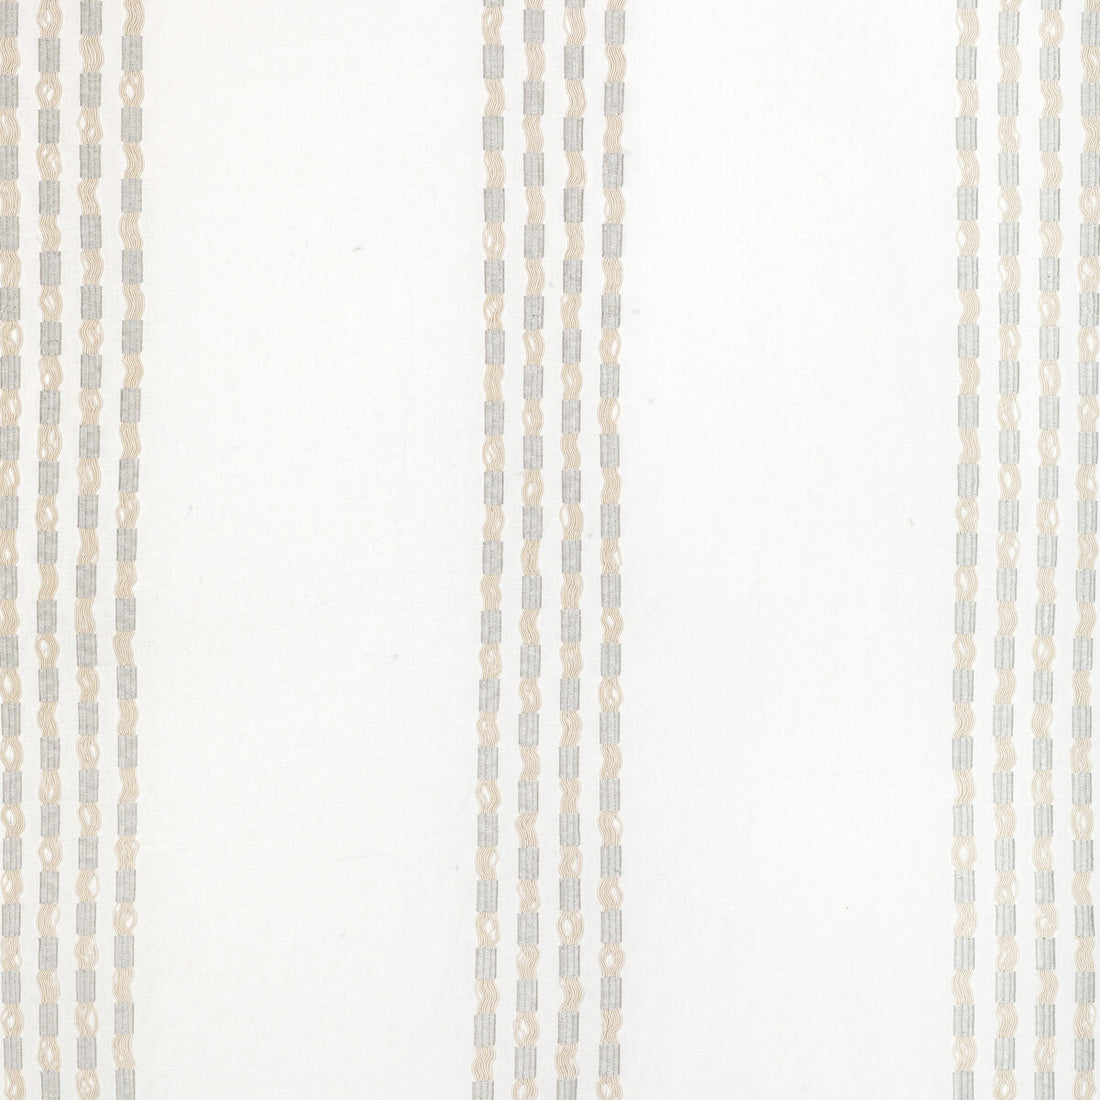 Linear Effect fabric in platinum color - pattern 36354.11.0 - by Kravet Couture in the Modern Luxe III collection